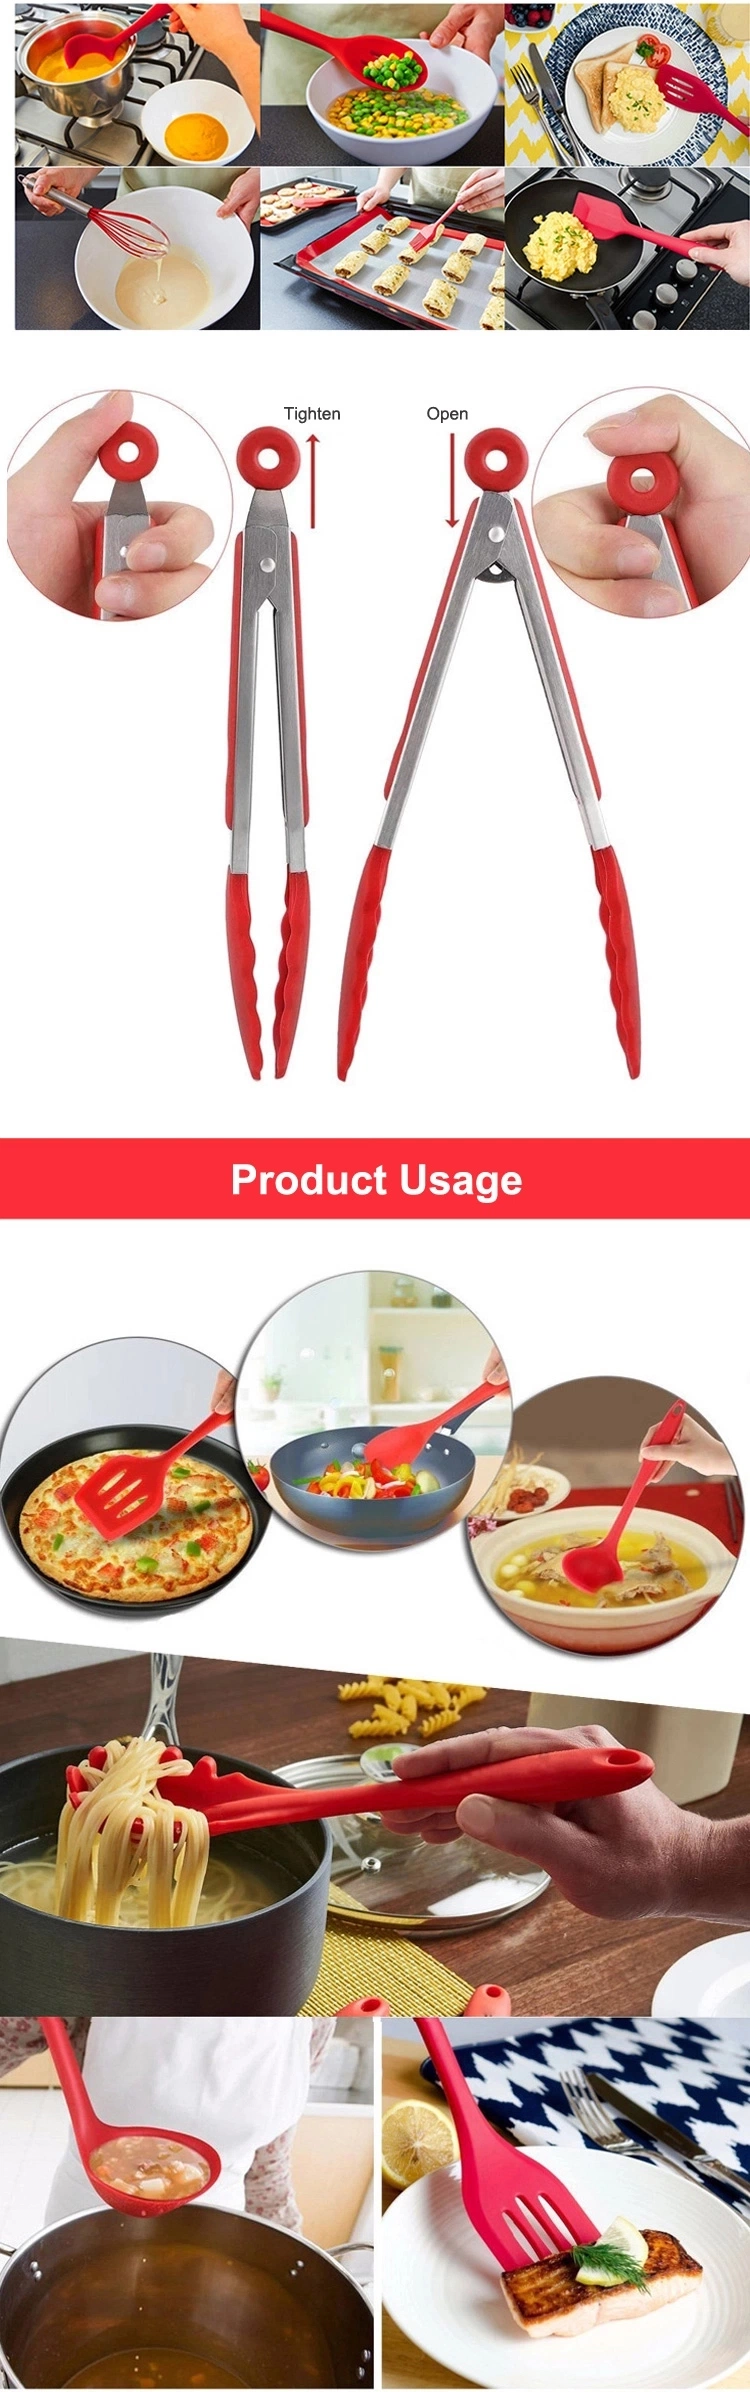 Hot Selling Items Cookware 100% BPA Free Silicone Cooking Tool Set Kitchen Utensils